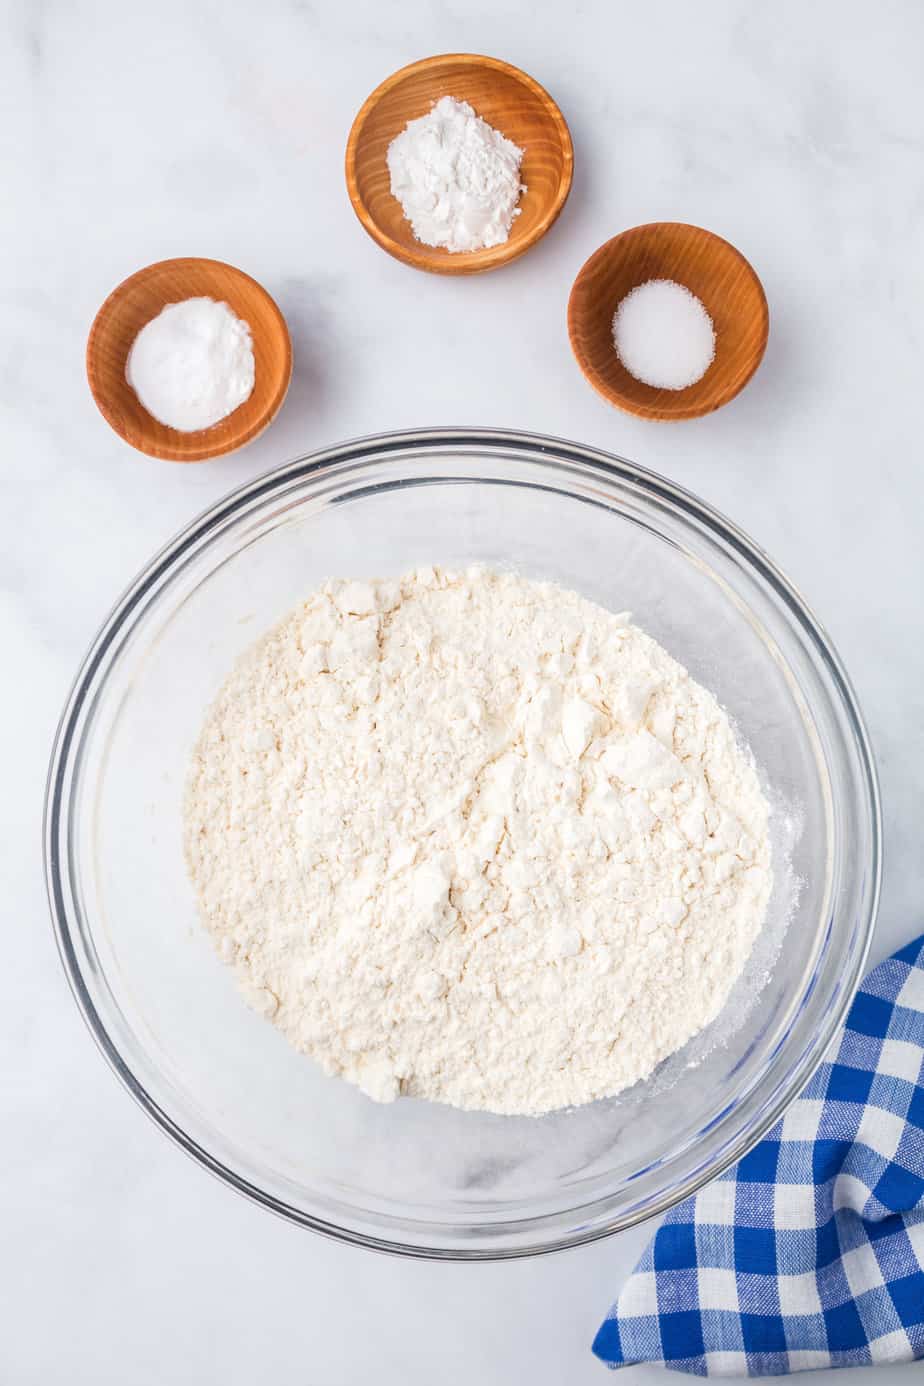 Flour in a large mixing bowl with other dry ingredients in small bowls nearby on a counter from overhead.